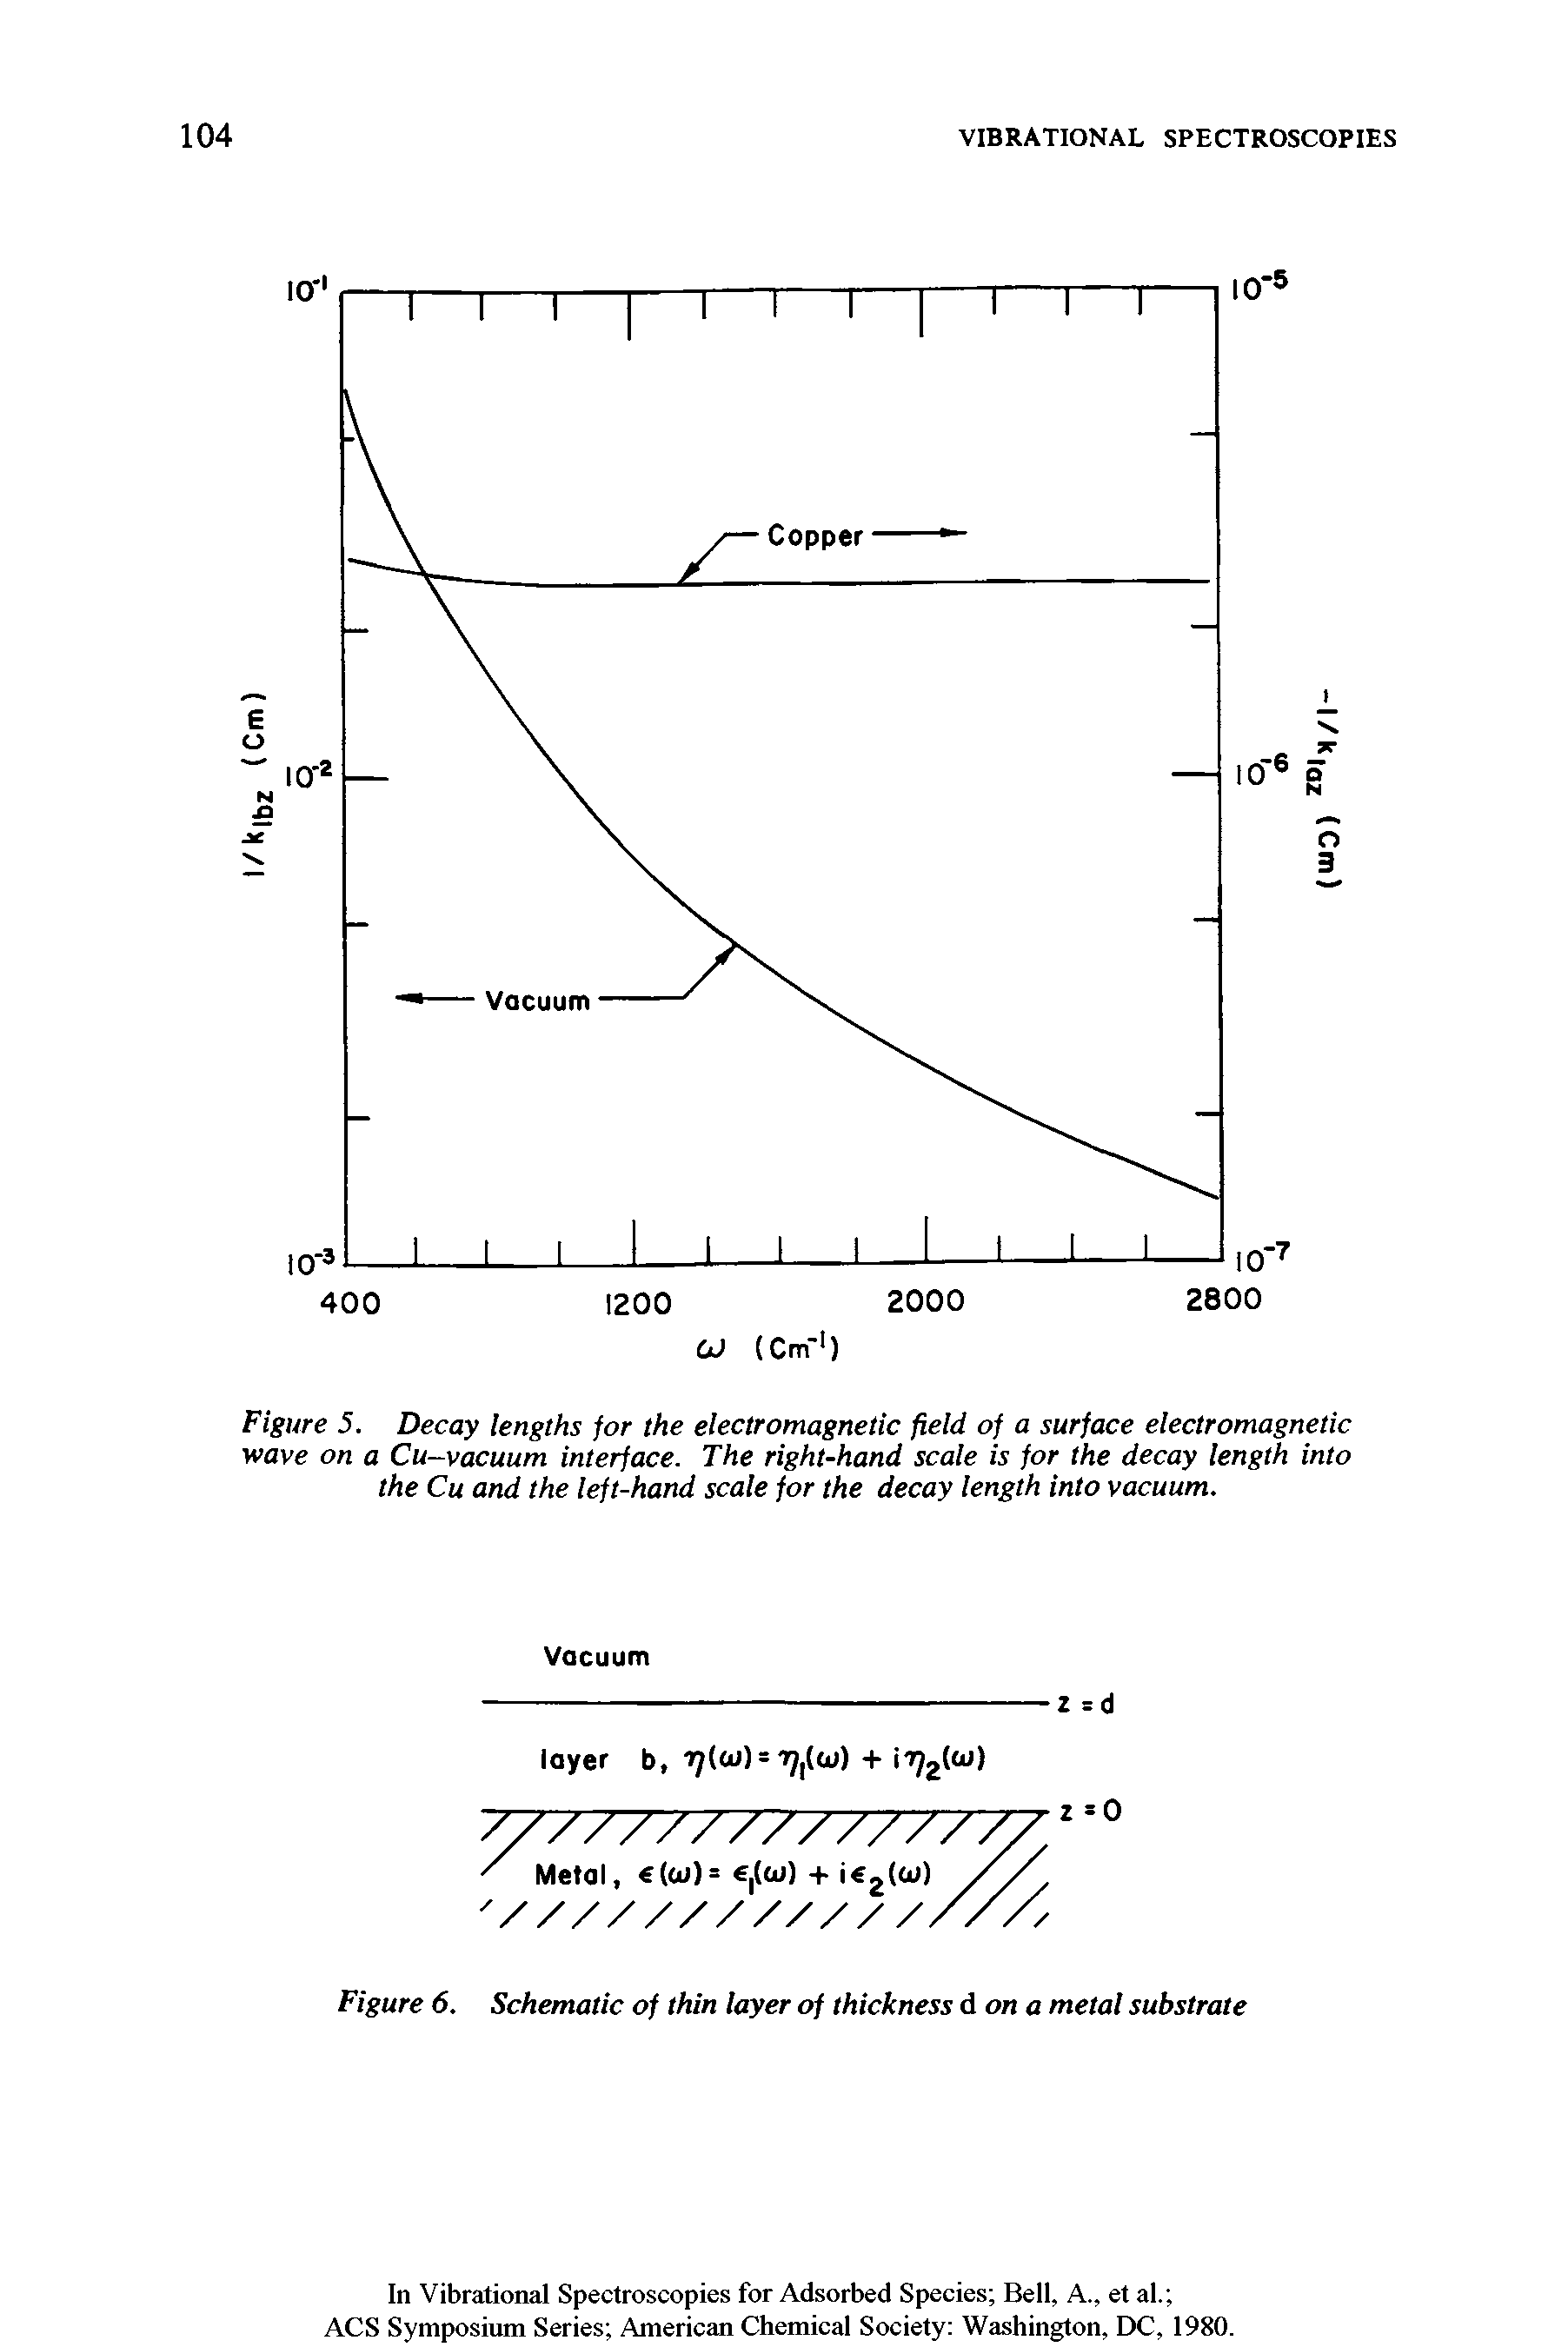 Figure 5. Decay lengths for the electromagnetic field of a surface electromagnetic wave on a Cu-vacuum interface. The right-hand scale is for the decay length into the Cu and the left-hand scale for the decay length into vacuum.